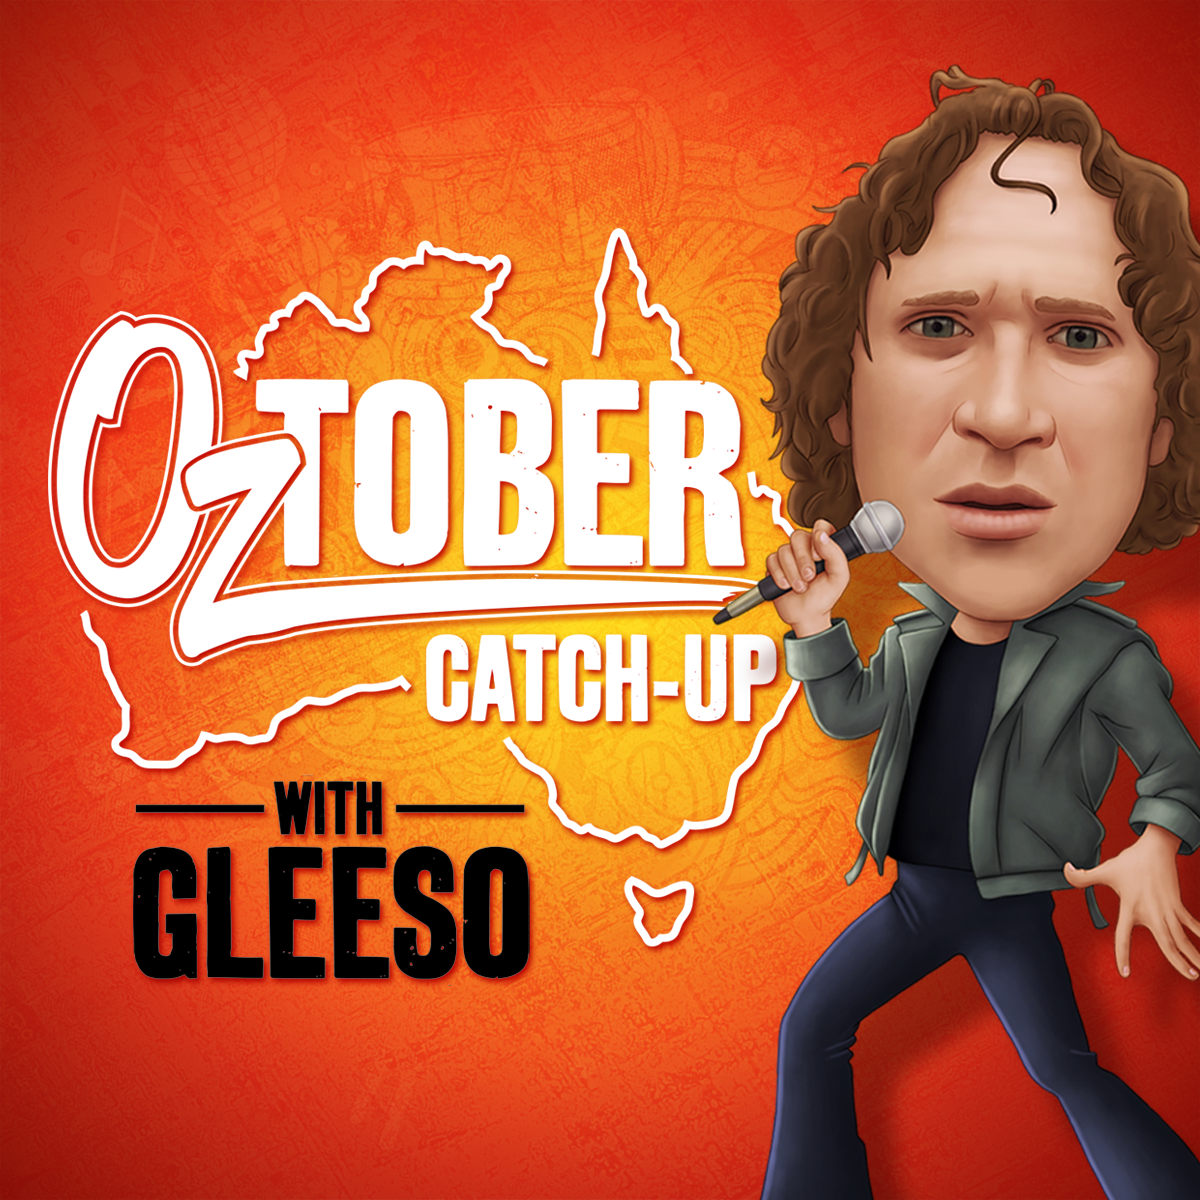 Oztober Catch-Up with Gleeso - Amy Shark